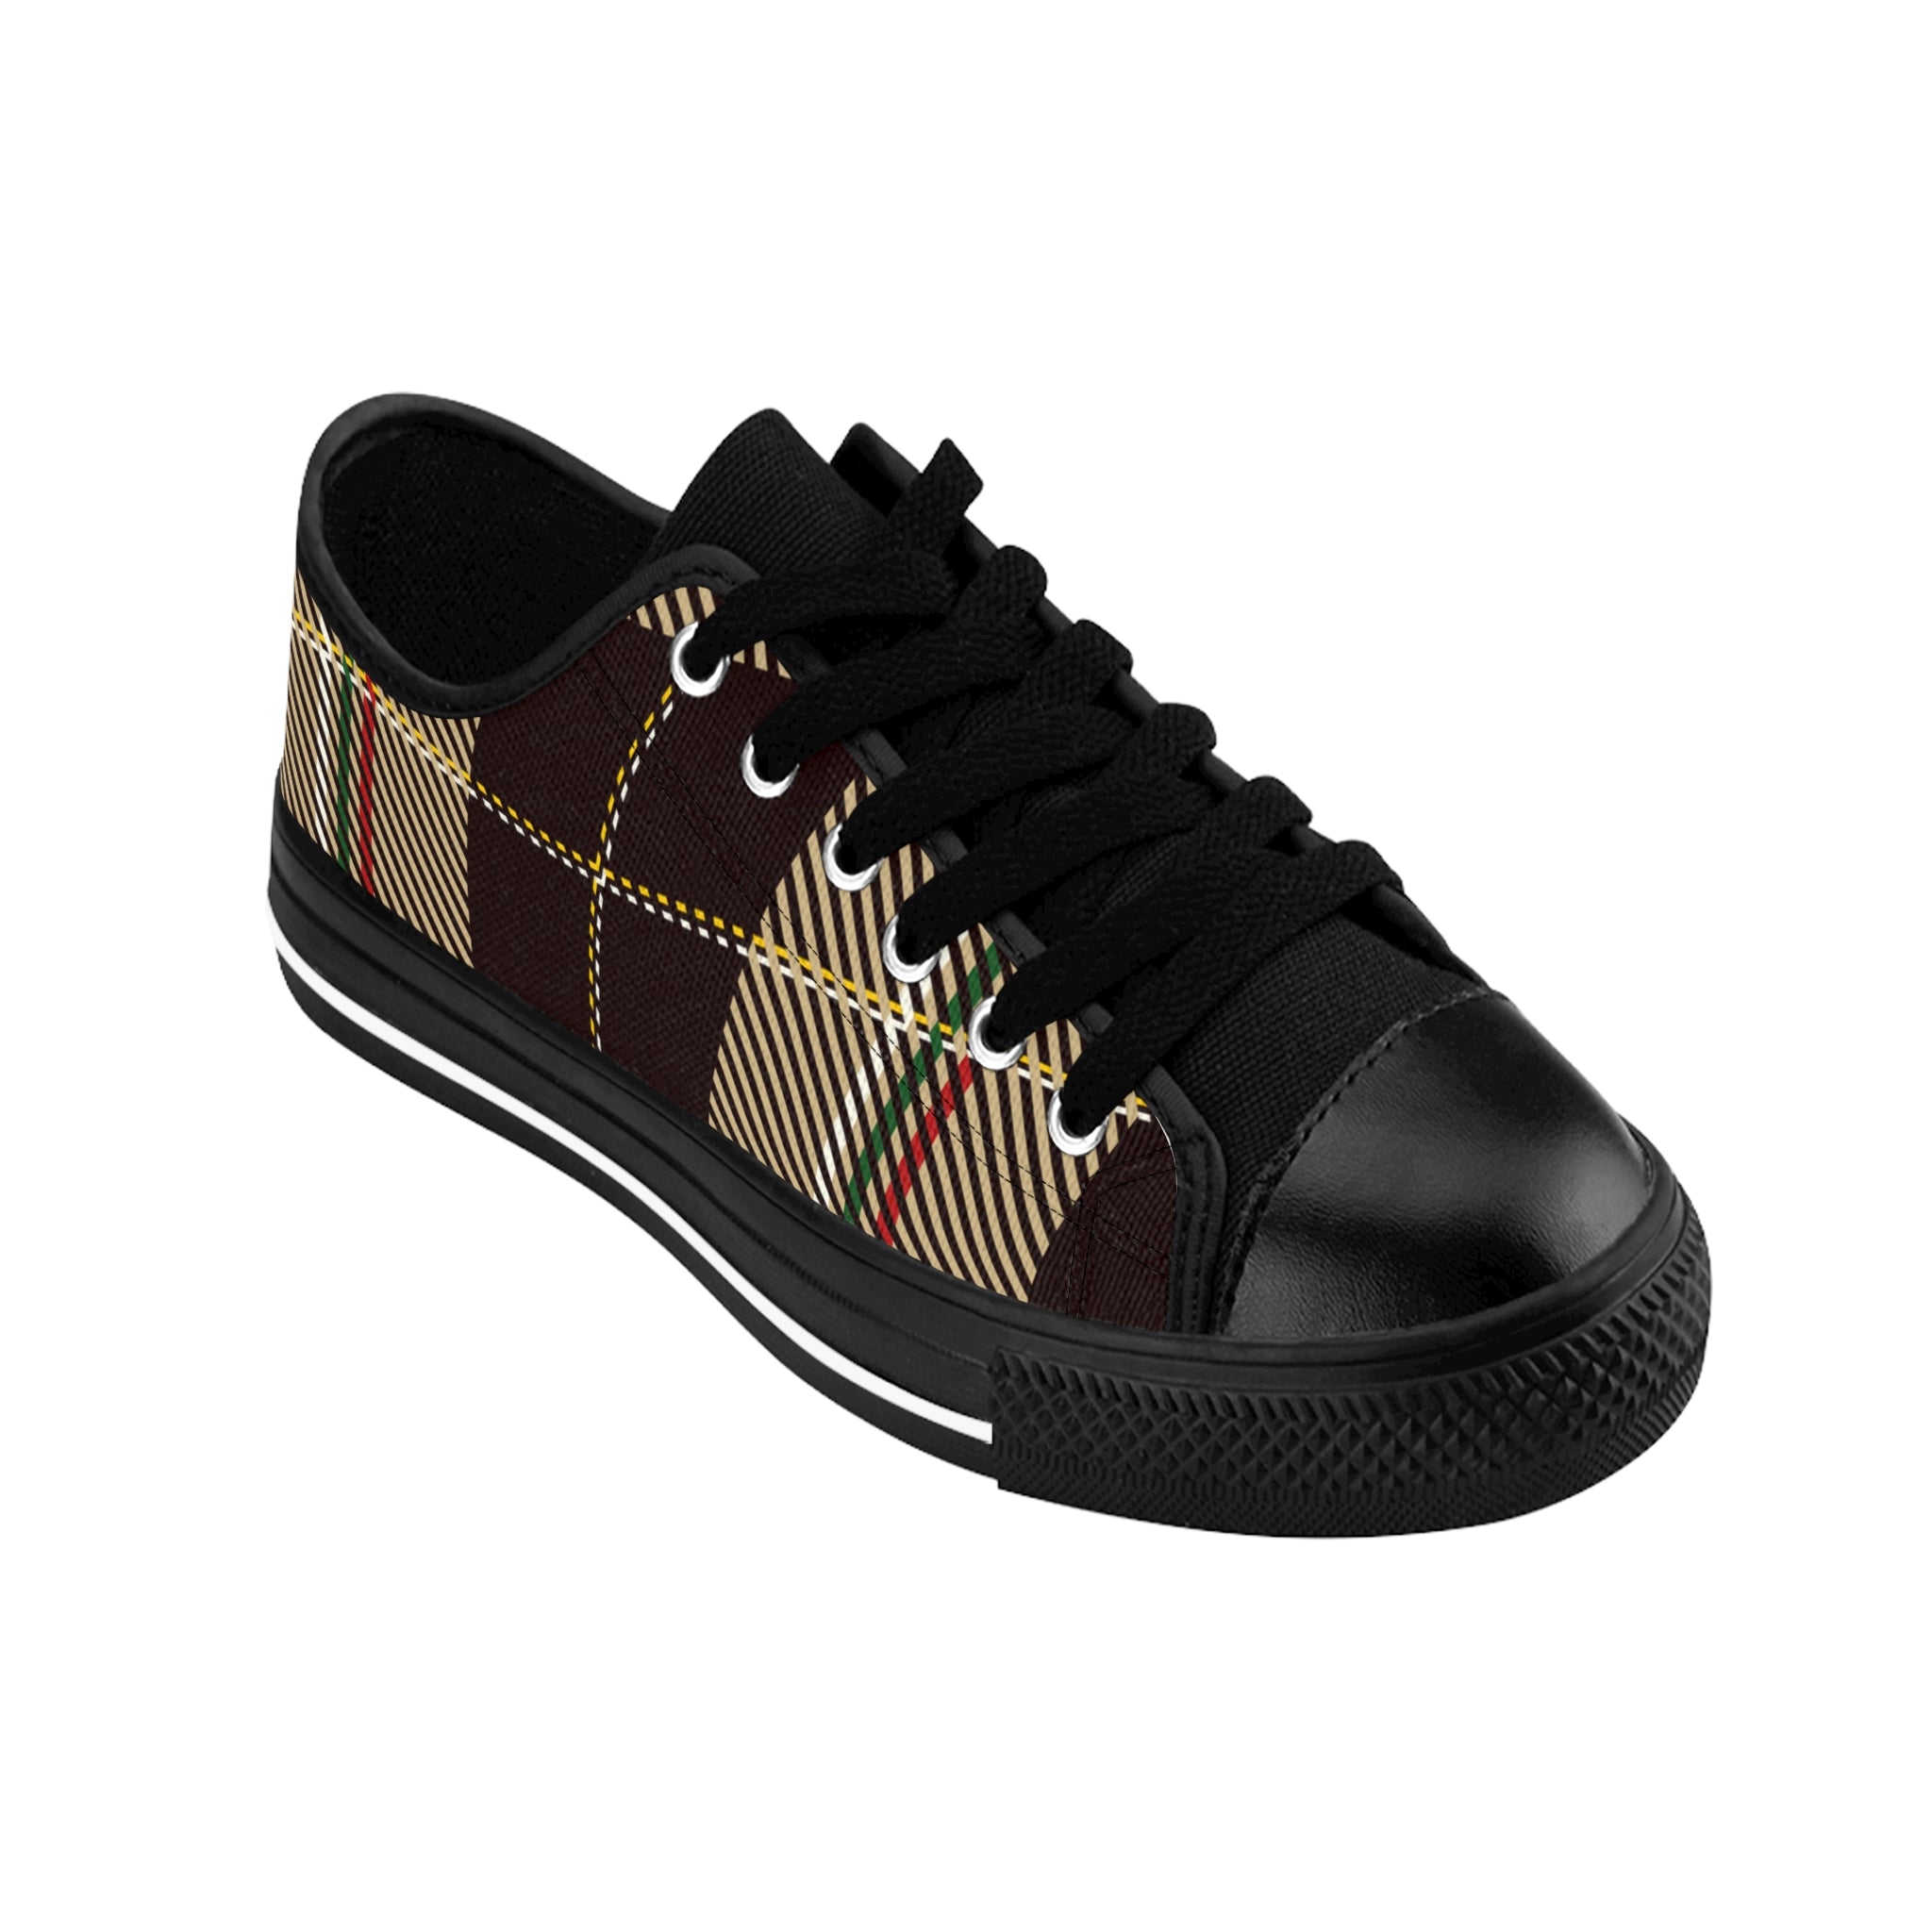 Designer Collection in Plaid (Dark Brown) Women's Low Top Canvas Shoes Shoes  The Middle Aged Groove